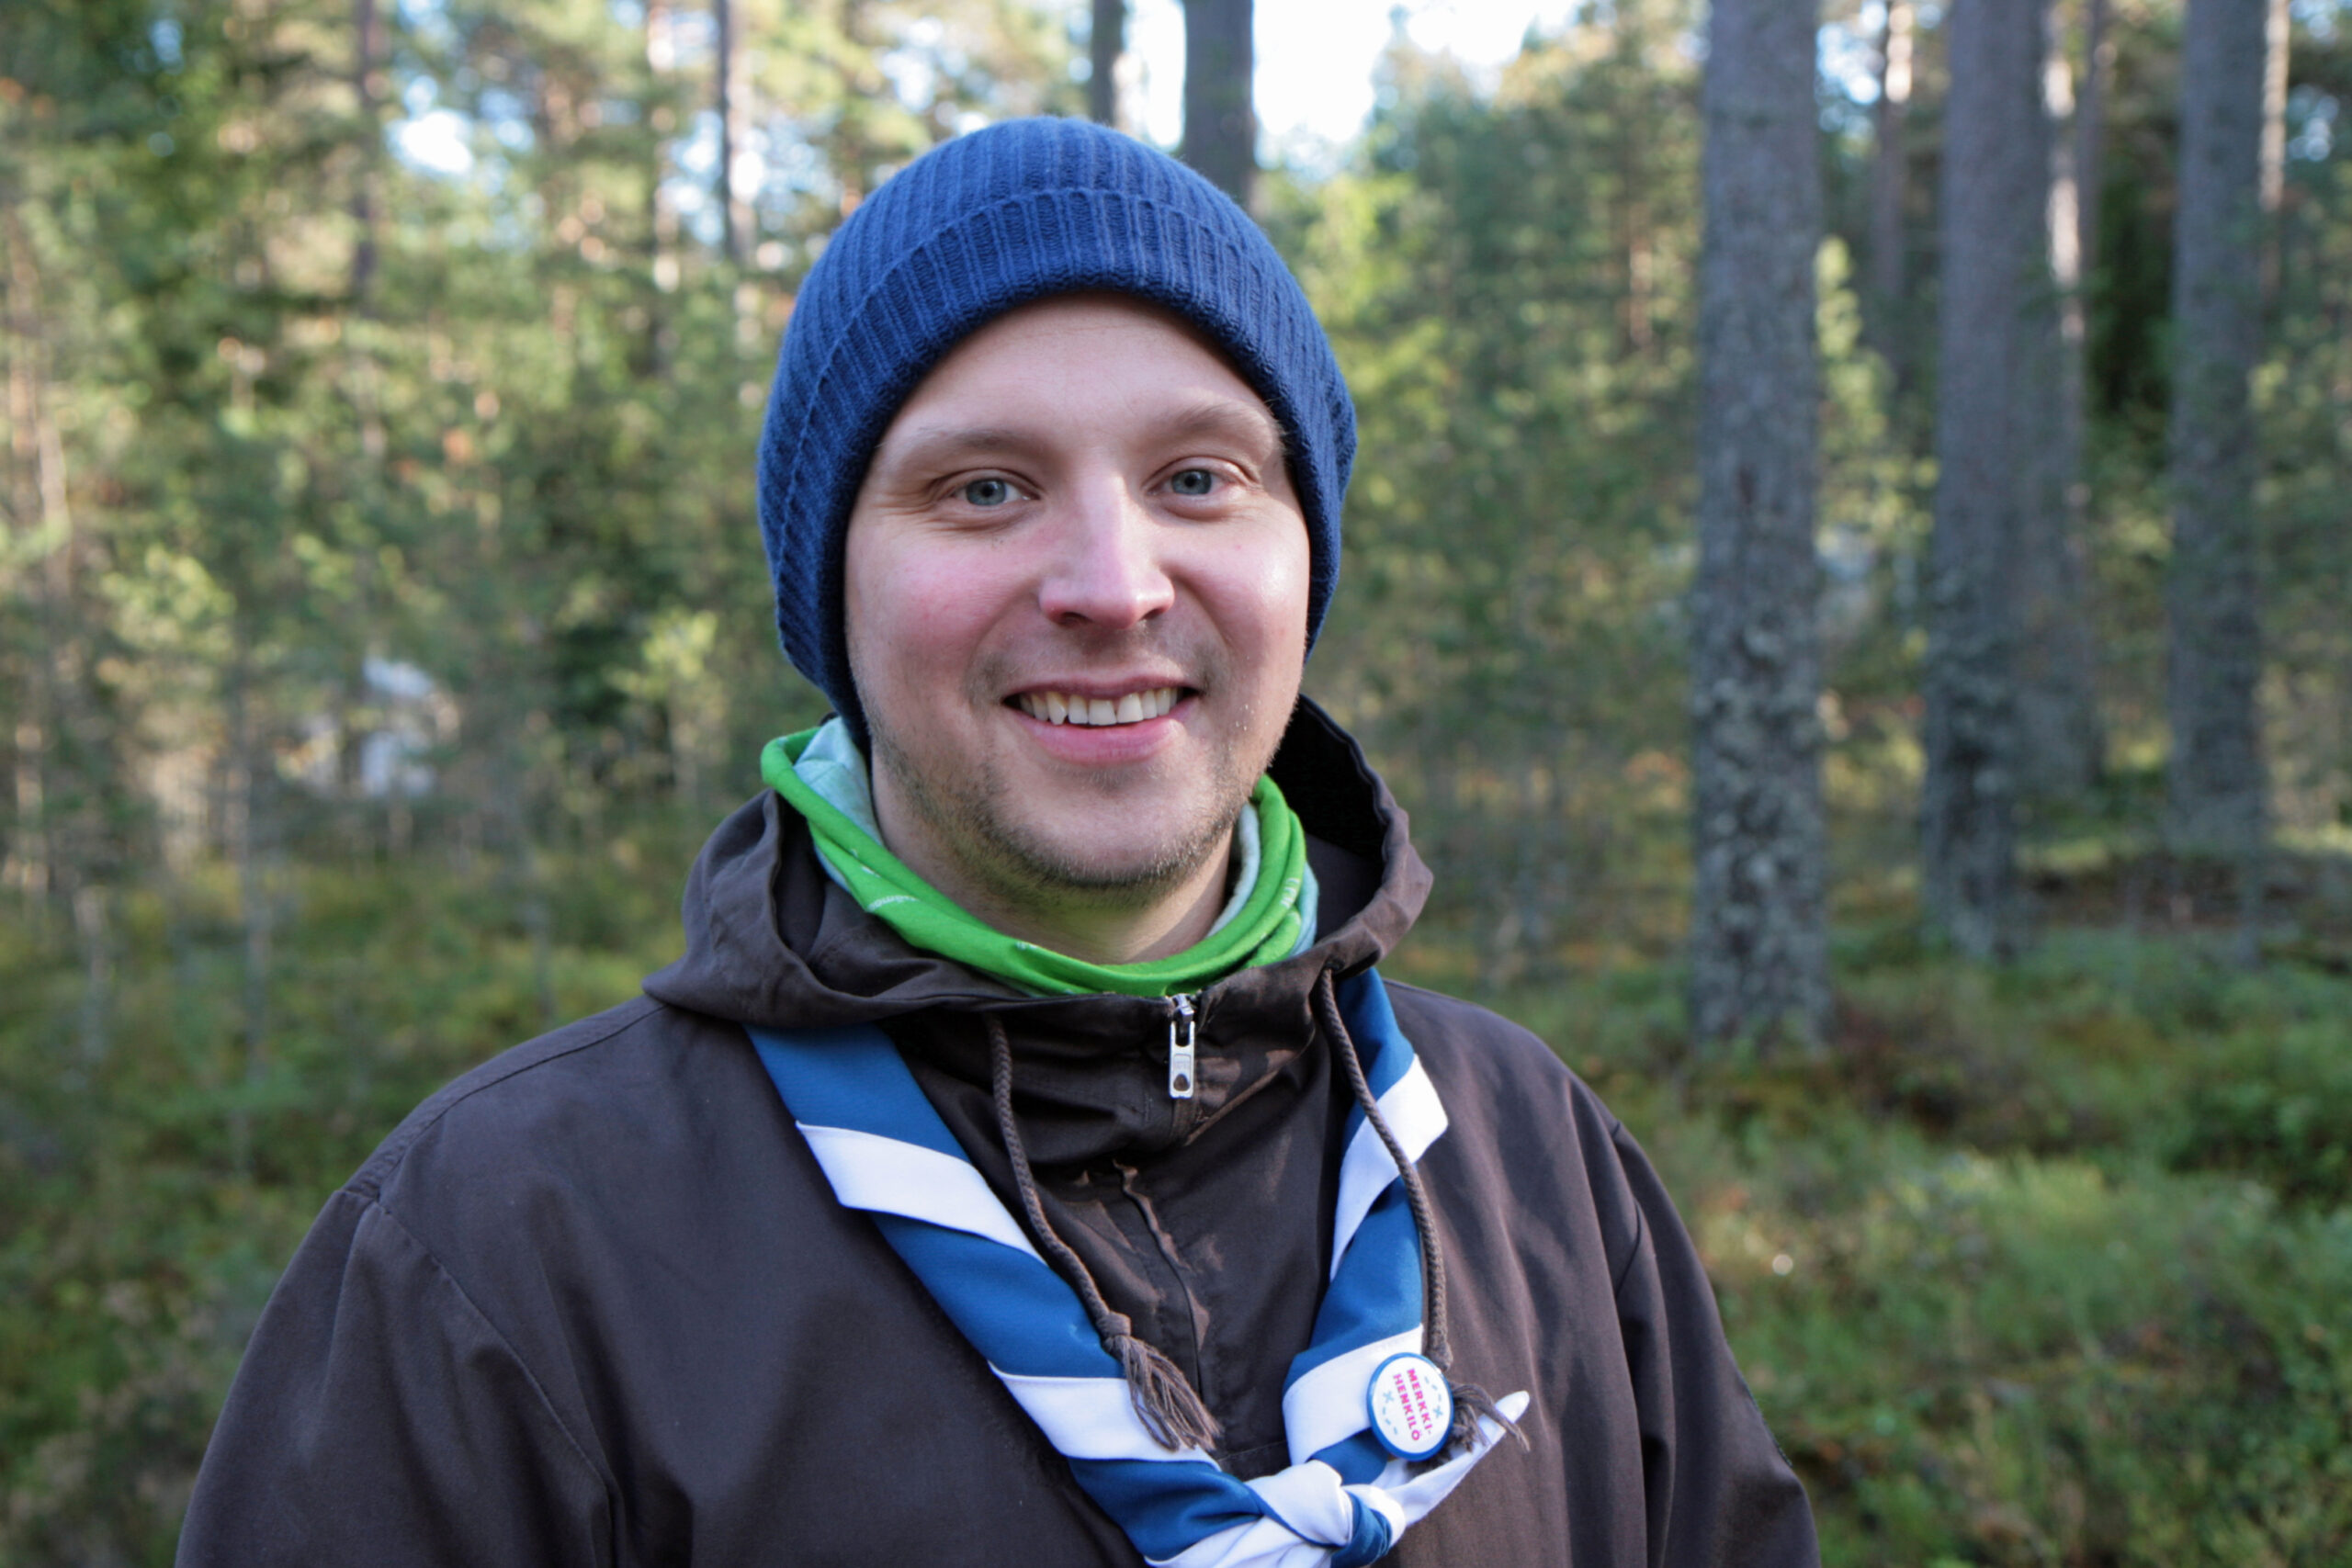 "Many forestry professionals have been scouts or guides," says Jaakko Nippala, himself a Master of Agriculture and Forestry. Photo: Anna Kauppi